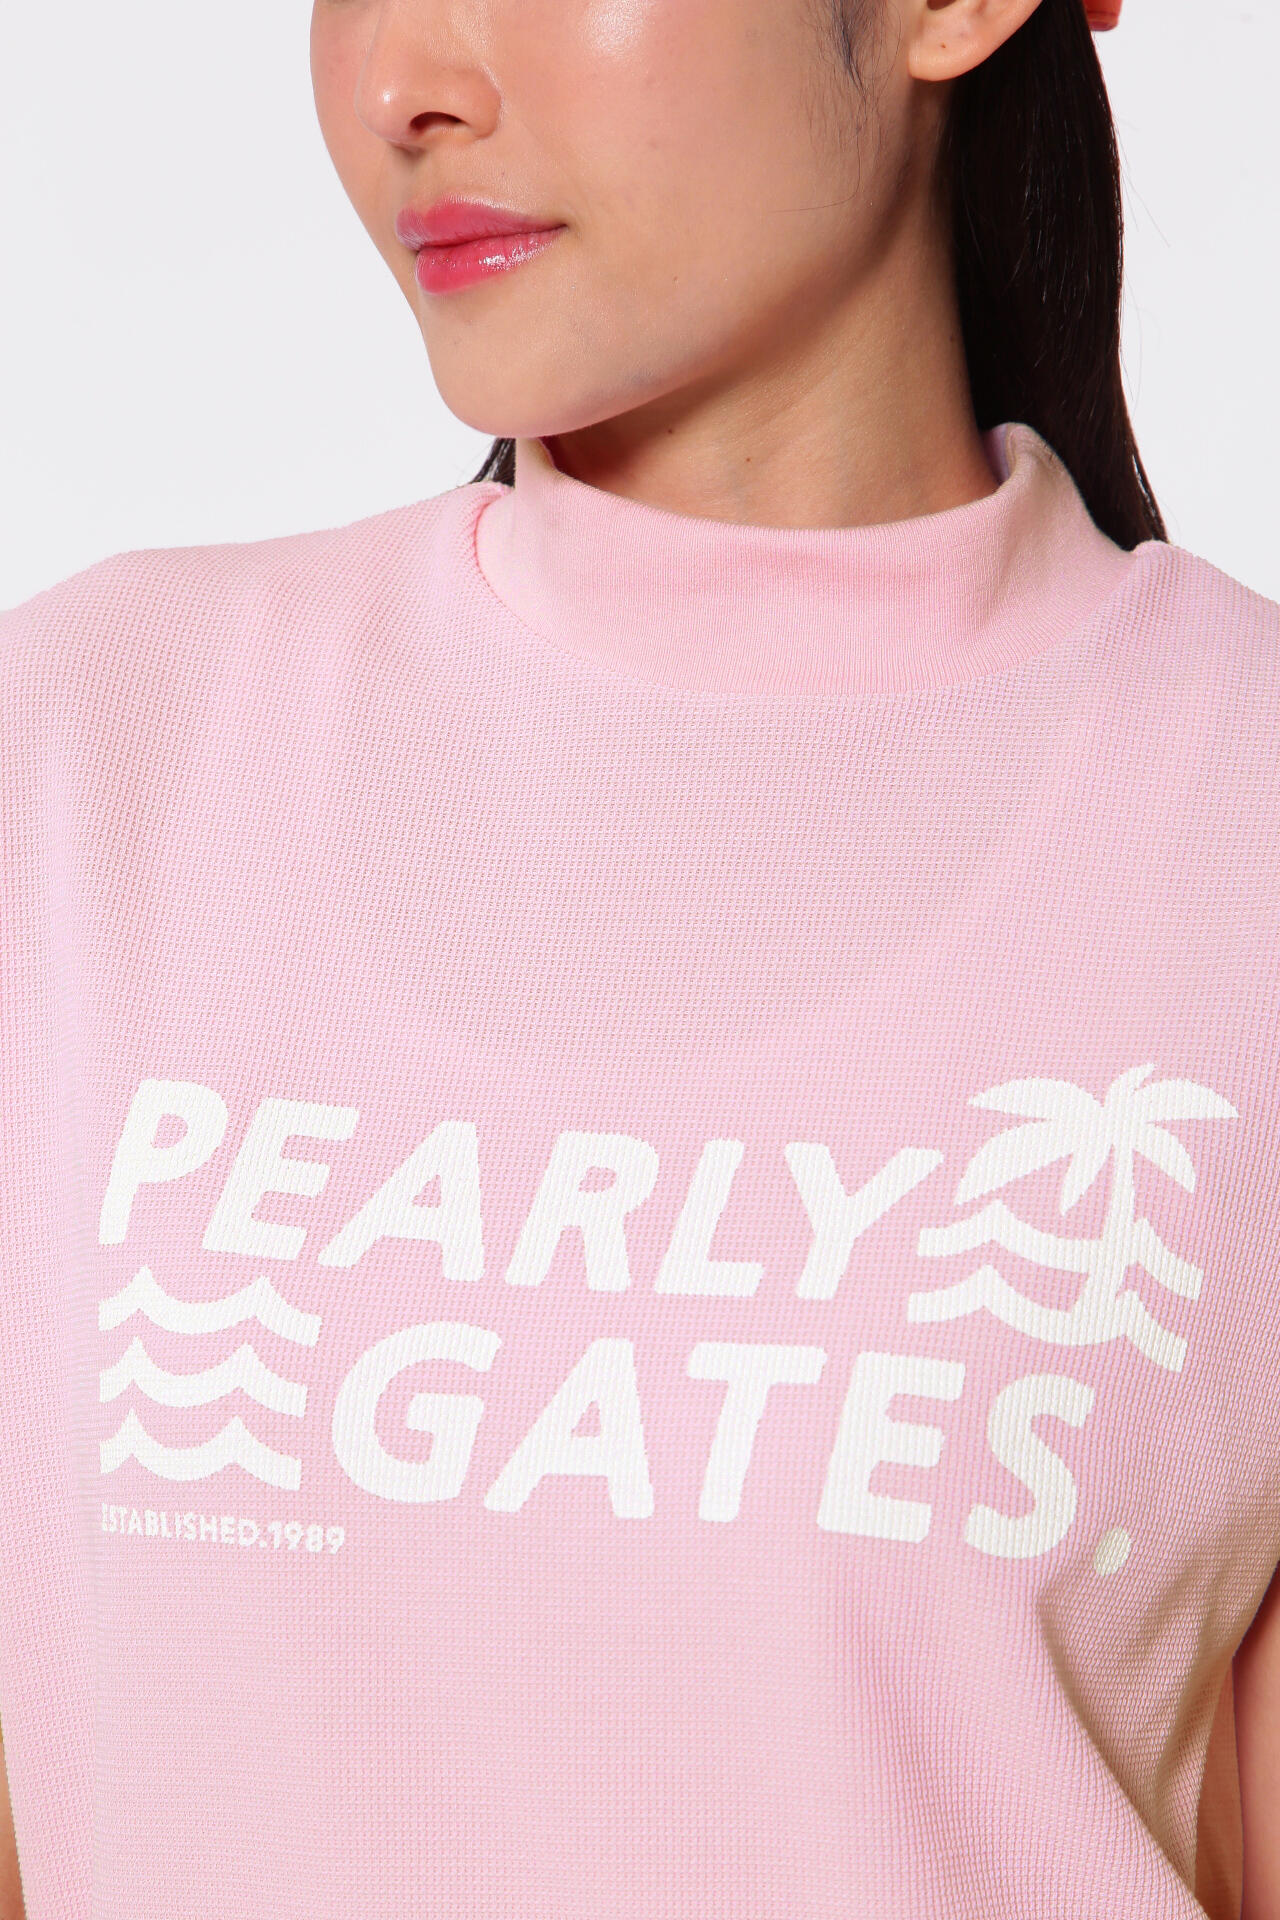 PEARLY GATES】Wフェースカノコ ハイネックカットソー ＜PALE TONE